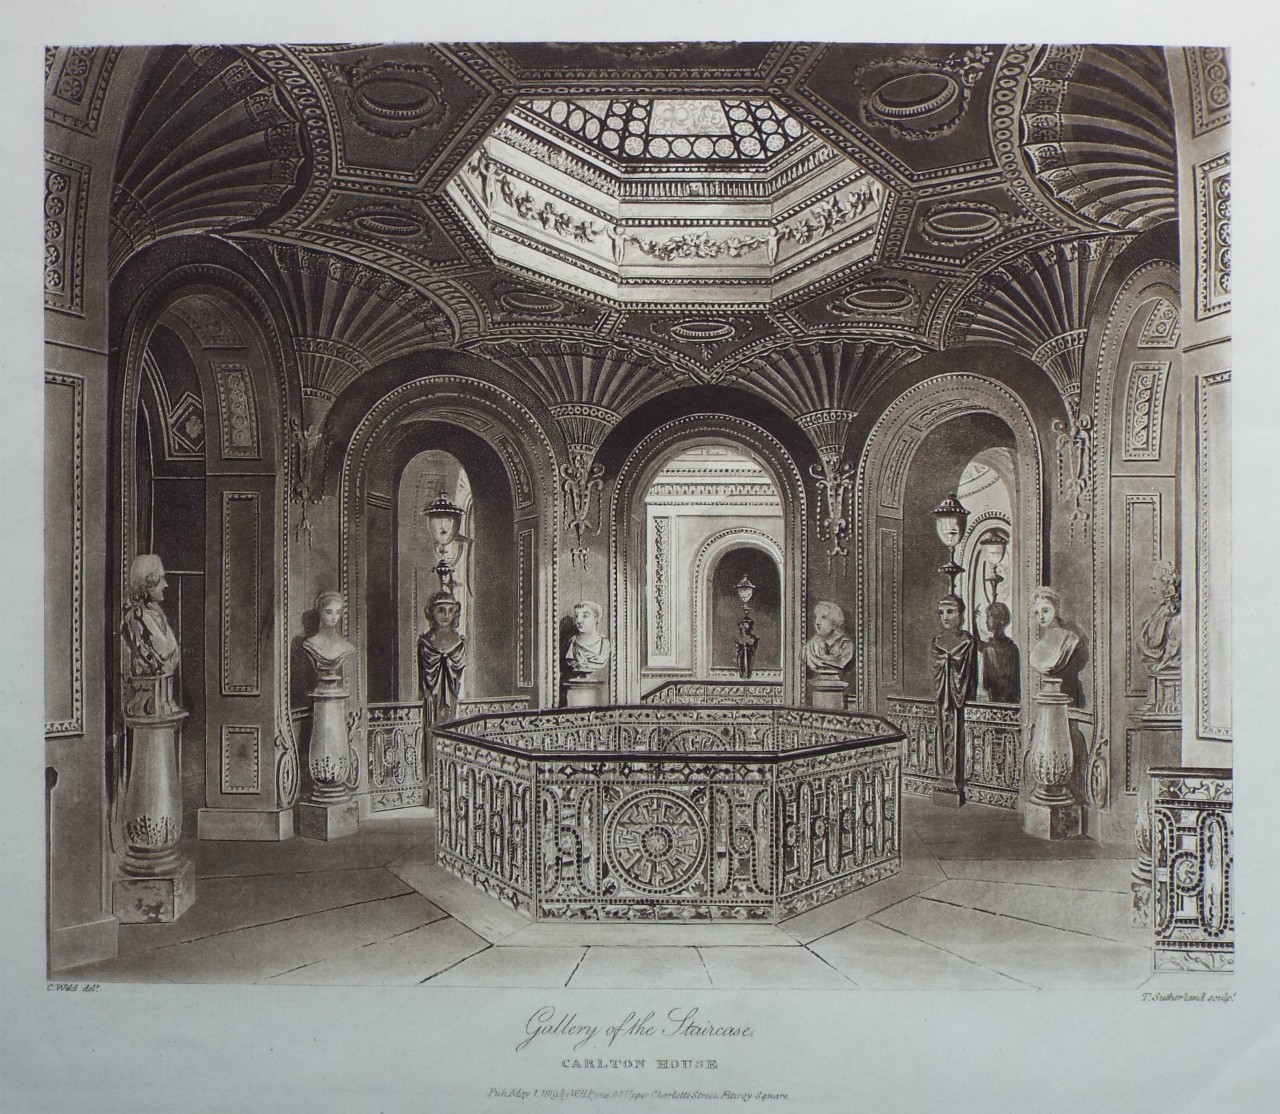 Aquatint - Gallery of the Staircase, Carlton House. - Sutherland